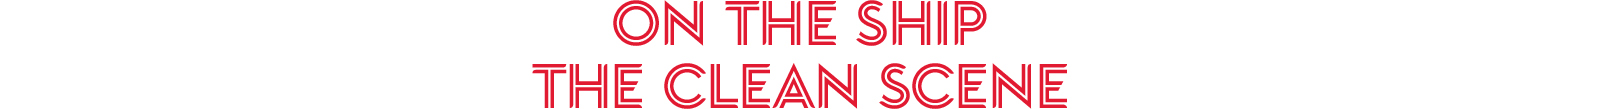 On the ship - the clean scene text